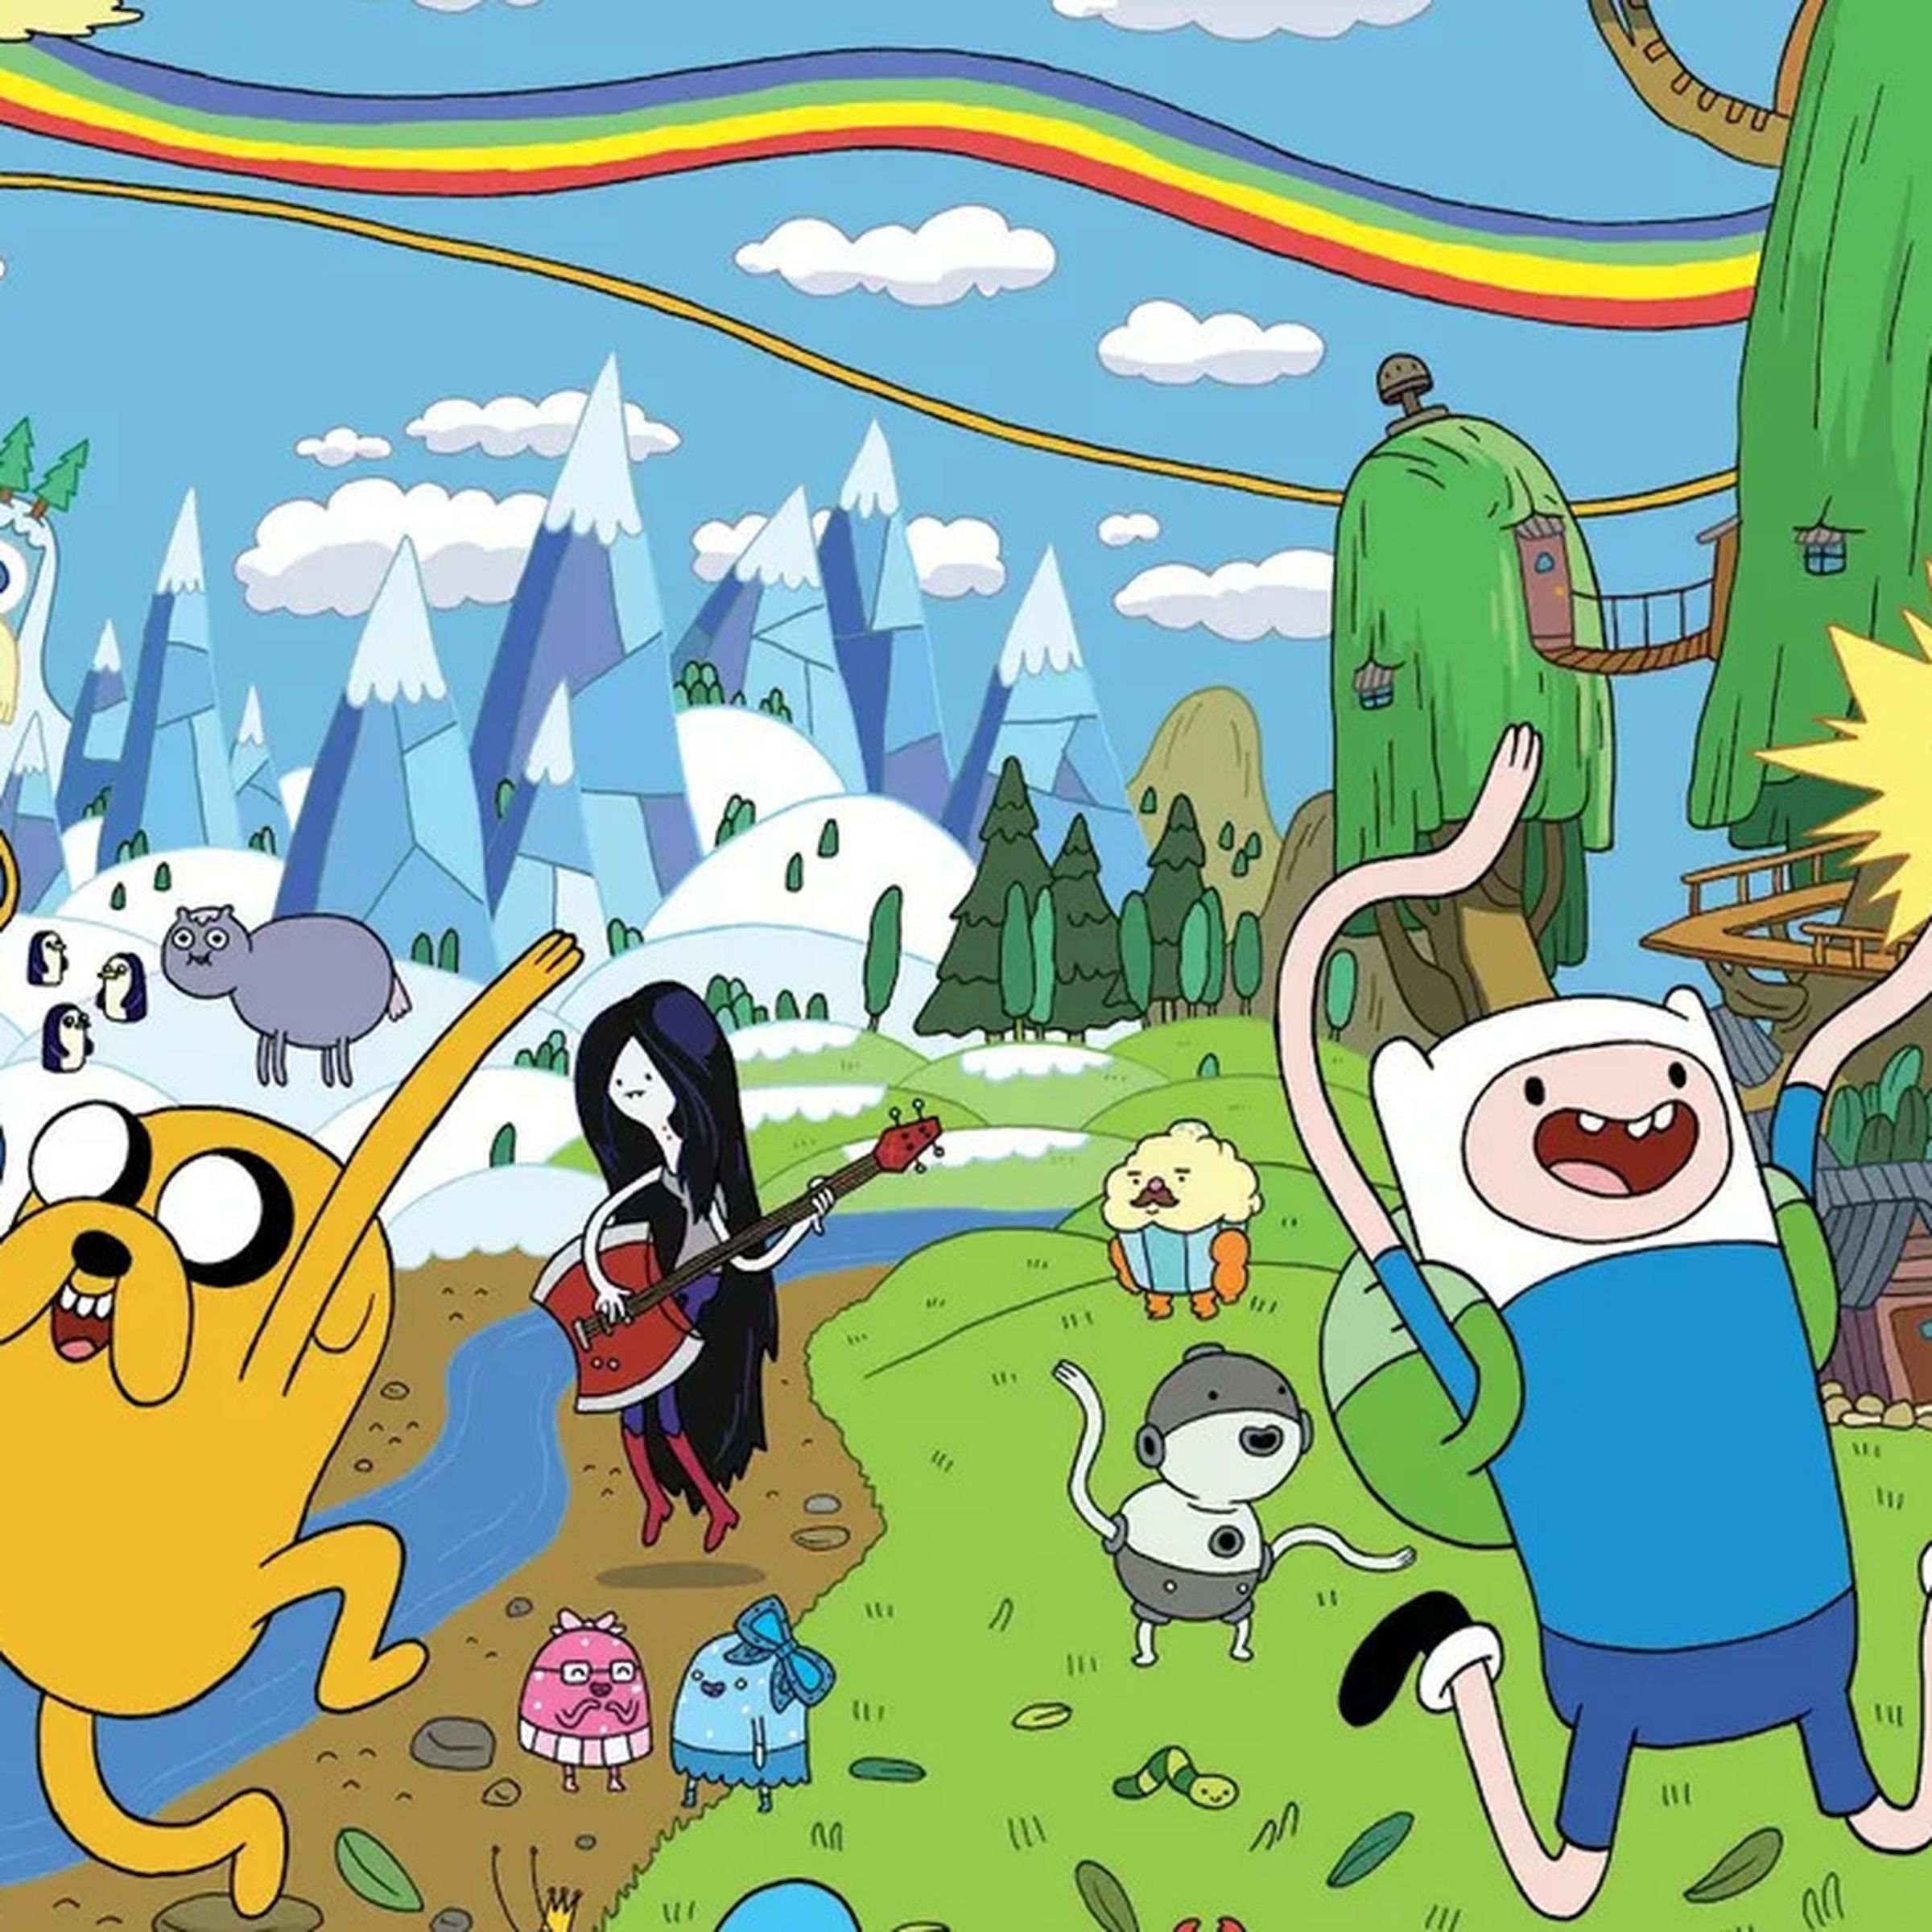 Characters from Adventure Time frolicking on grassy hills.